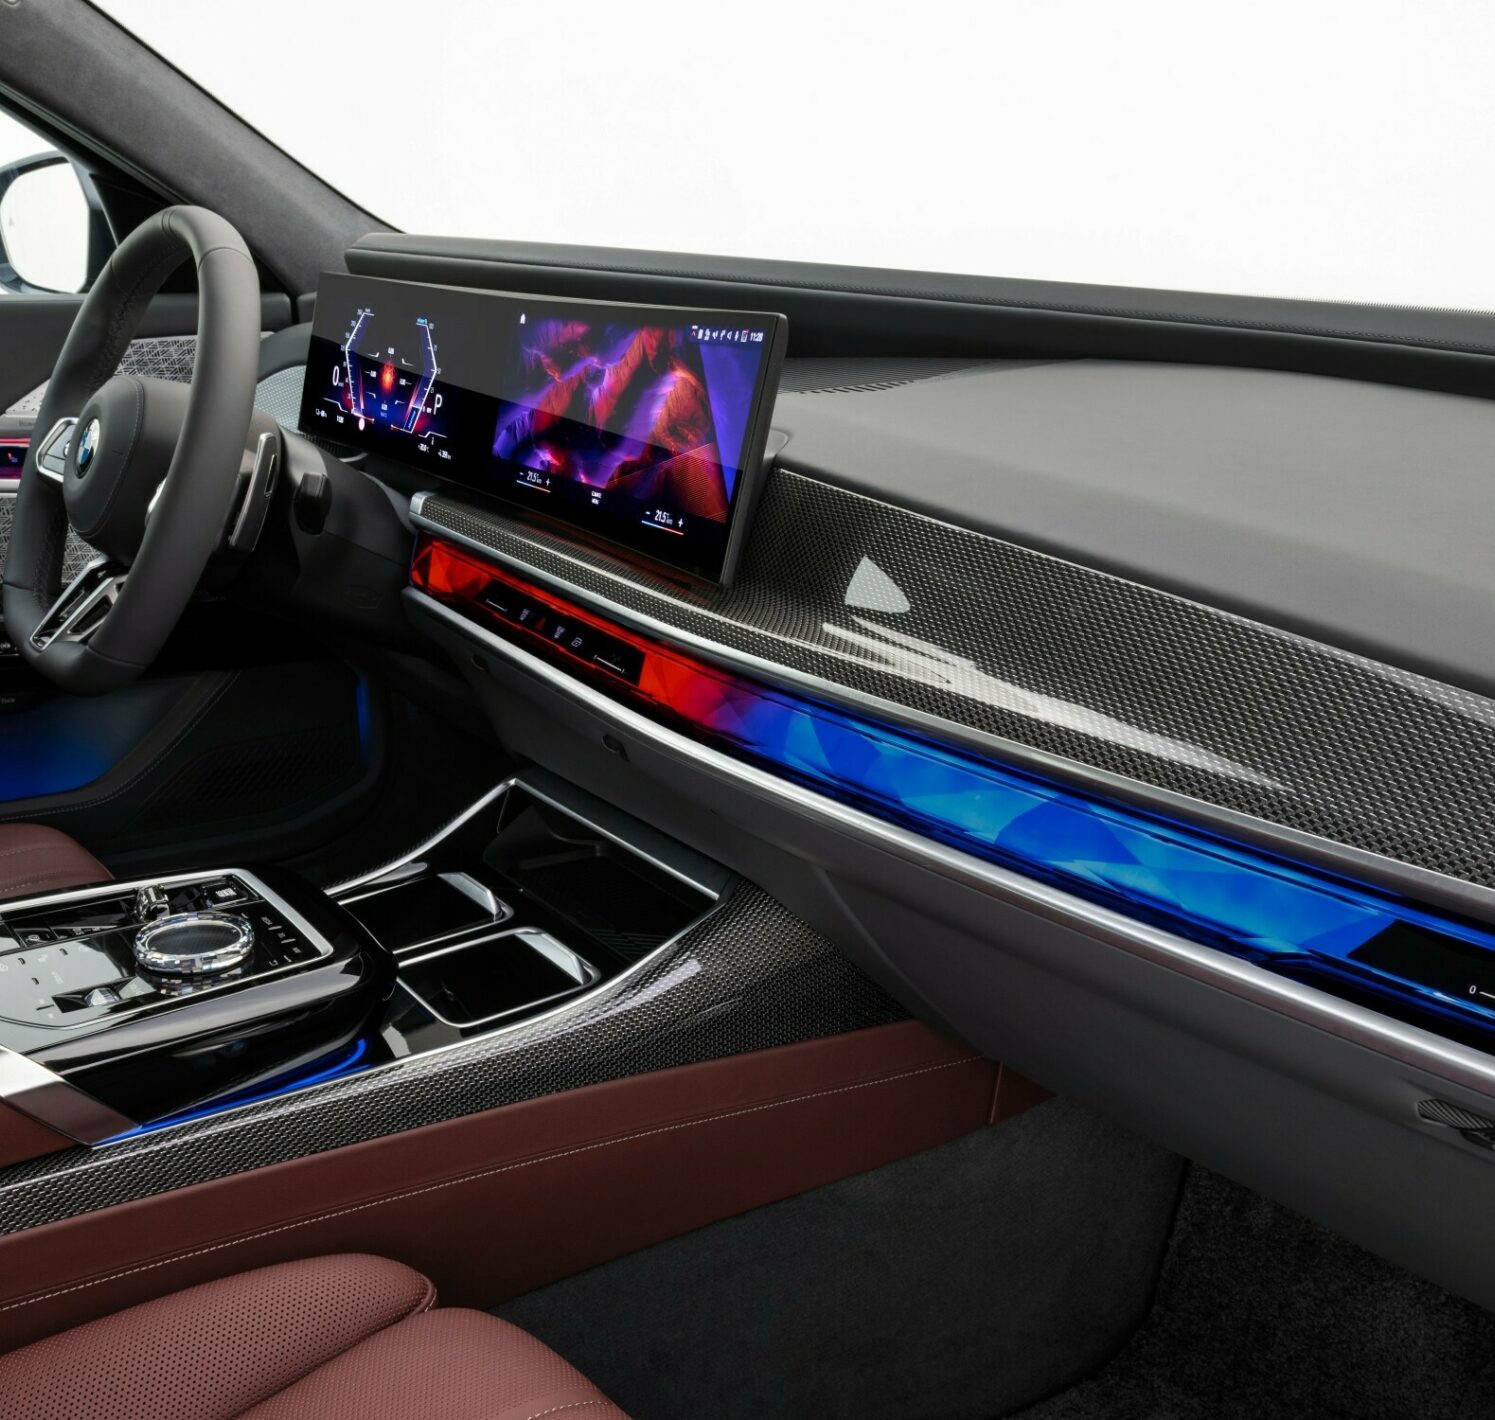 https://autofilter.sk/assets/images/rad-7/gallery/P90458212_lowRes_the-new-bmw-760i-xdr.jpg - obrazok